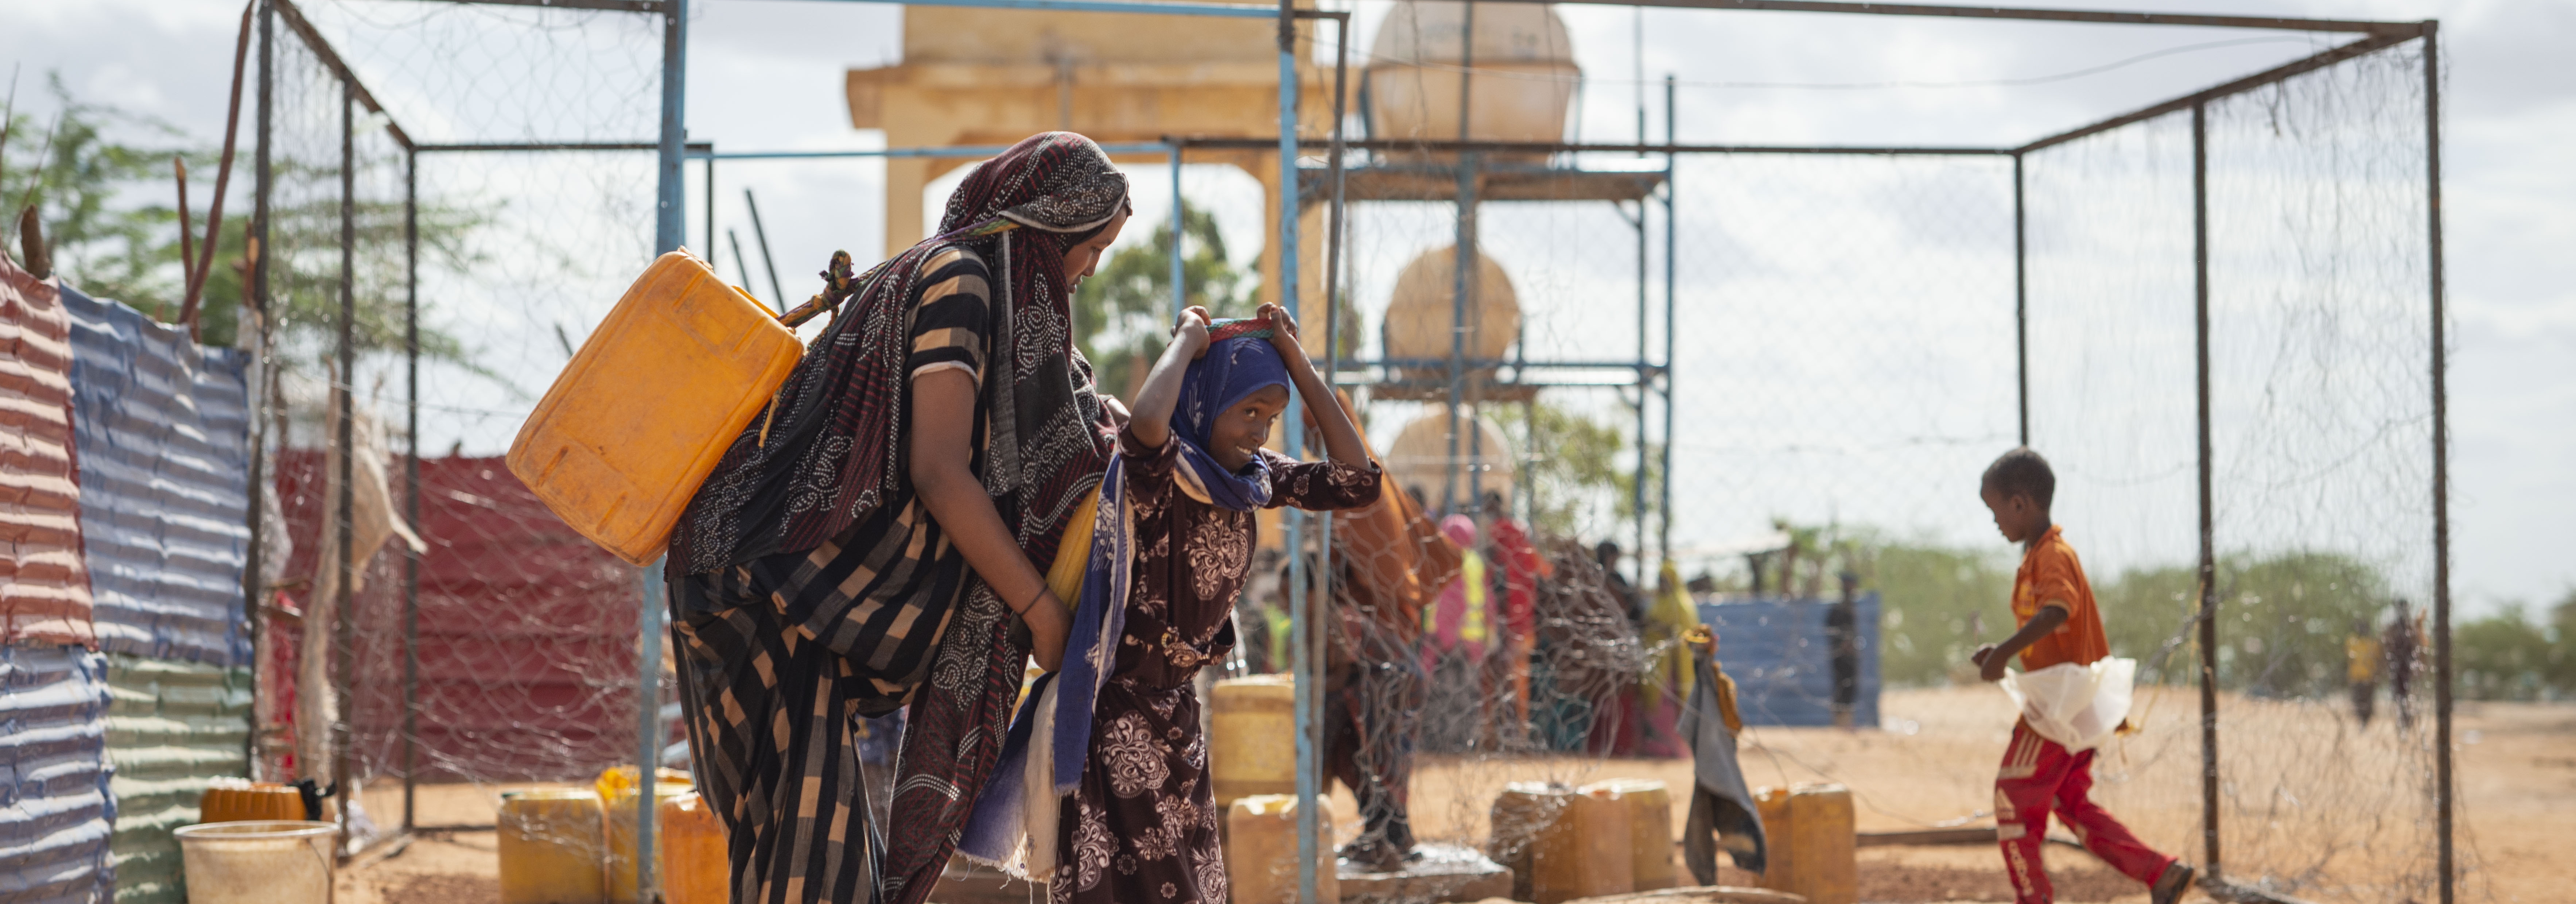 Mother and daughter collect water from one of the sustainable water supplies in Doolow IDP site, Gedo Region. ©IOM 2020